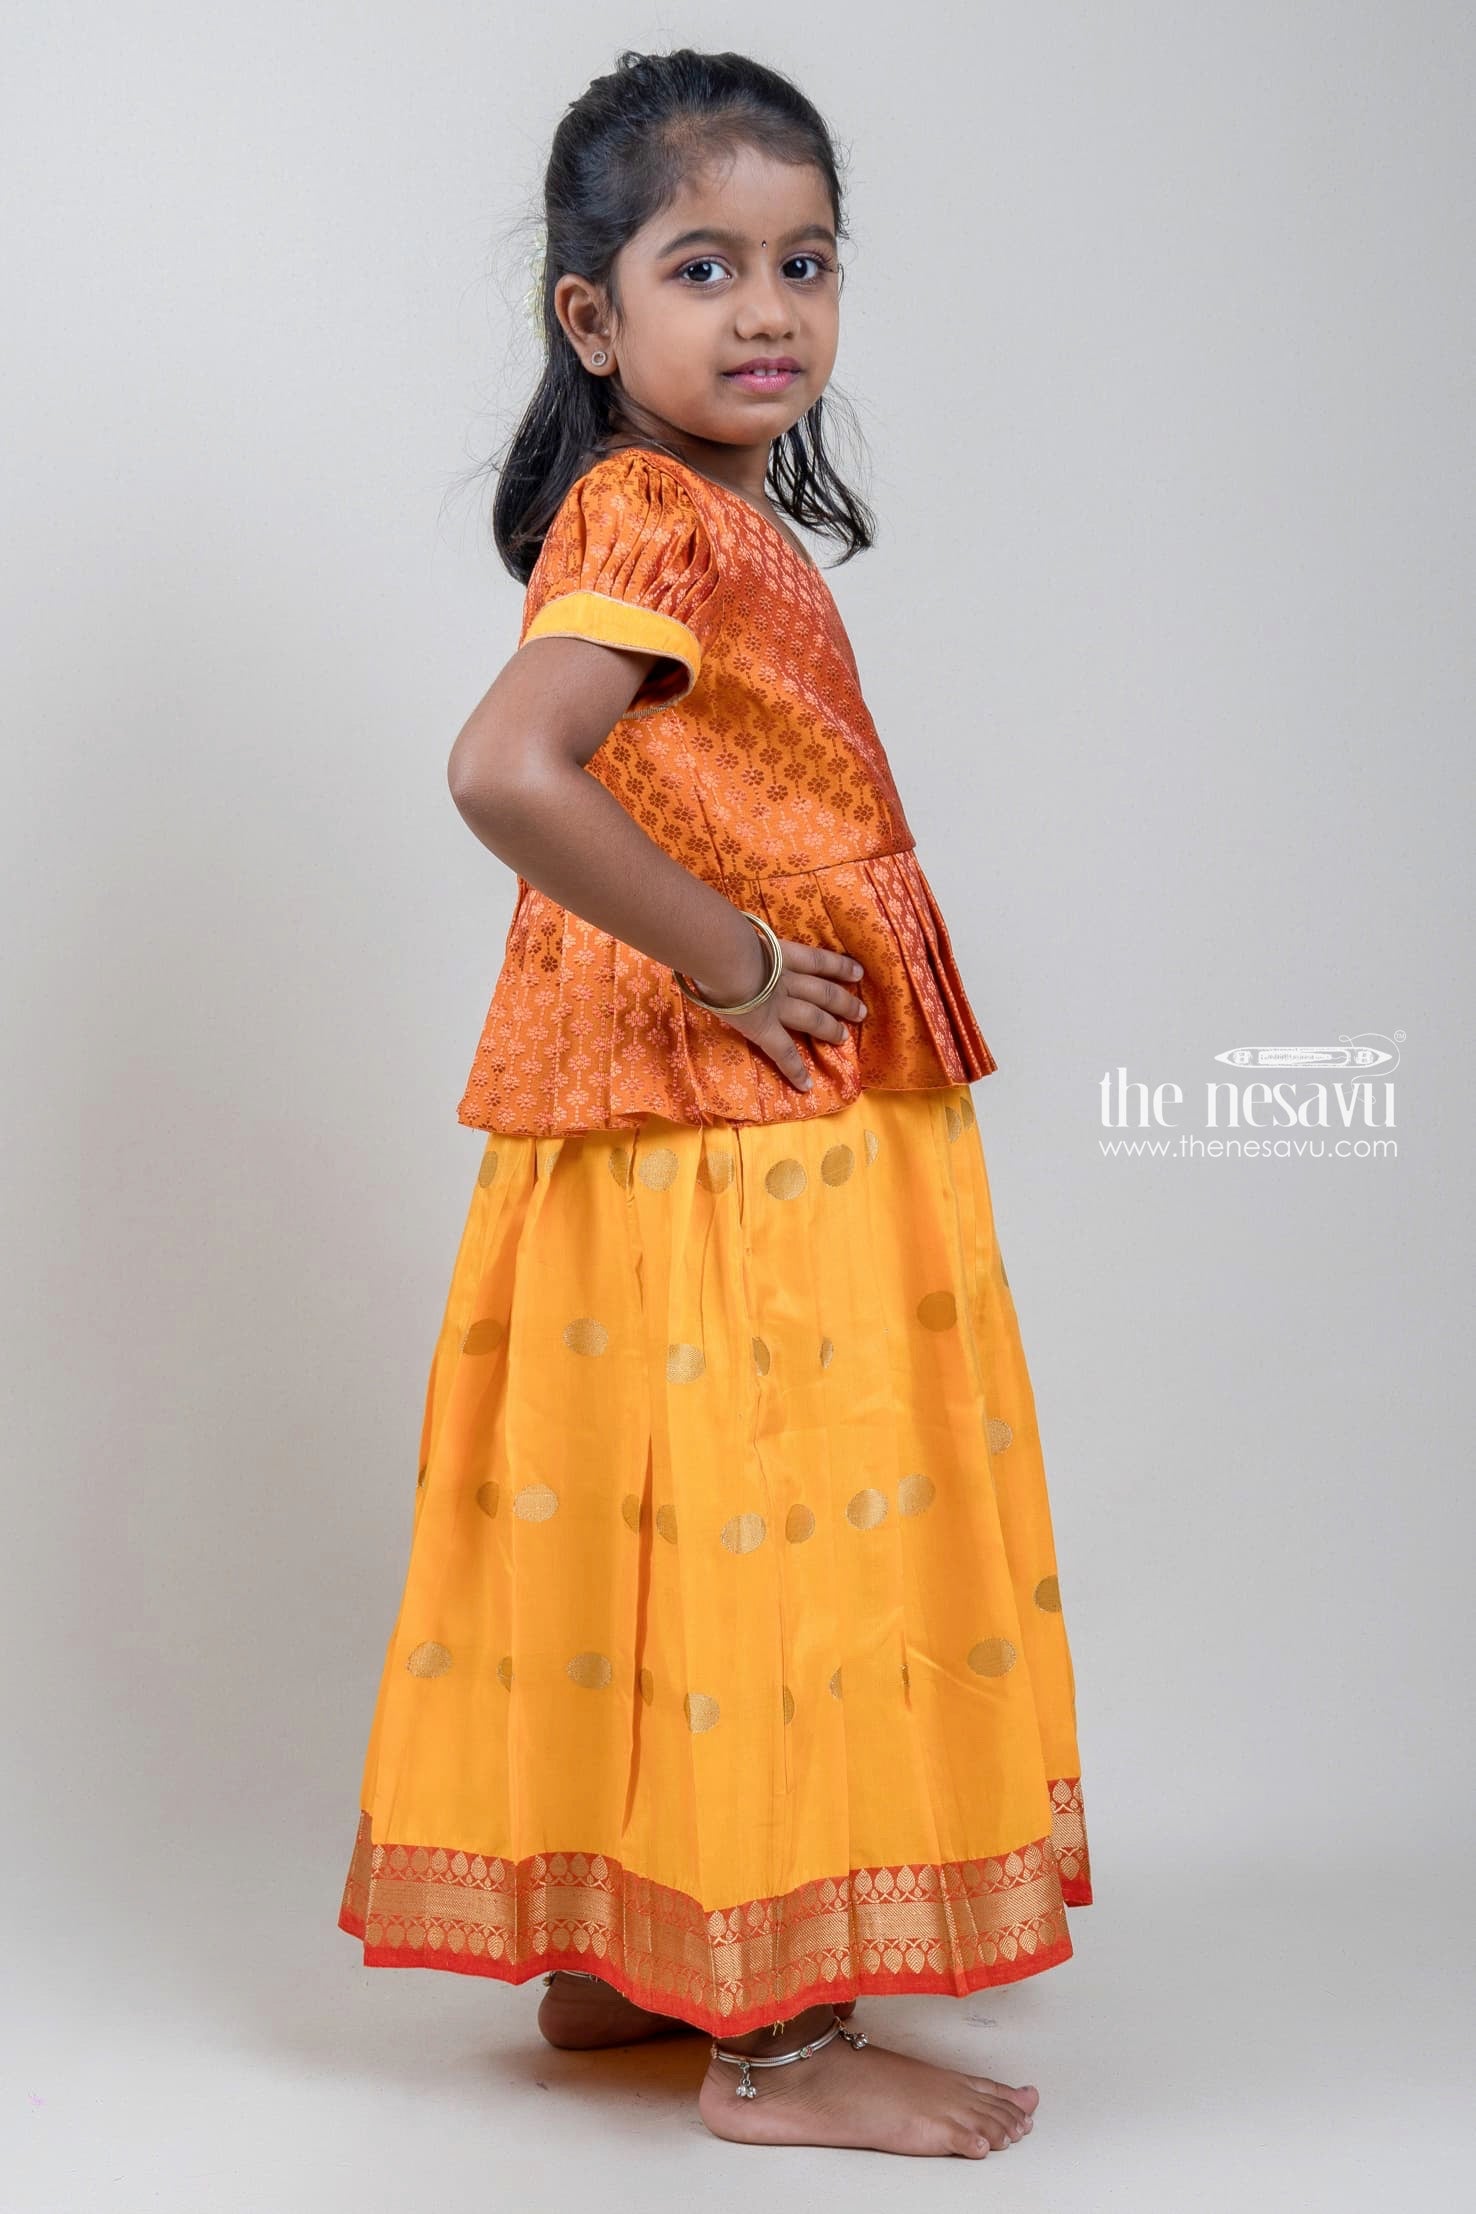 BANJUL, GAMBIA - MAR 14, 2013: Unidentified Gambian little girl in a shirt  and yellow skirt poses in the street in Gambia, Mar 14, 2013. Major ethnic  Stock Photo - Alamy